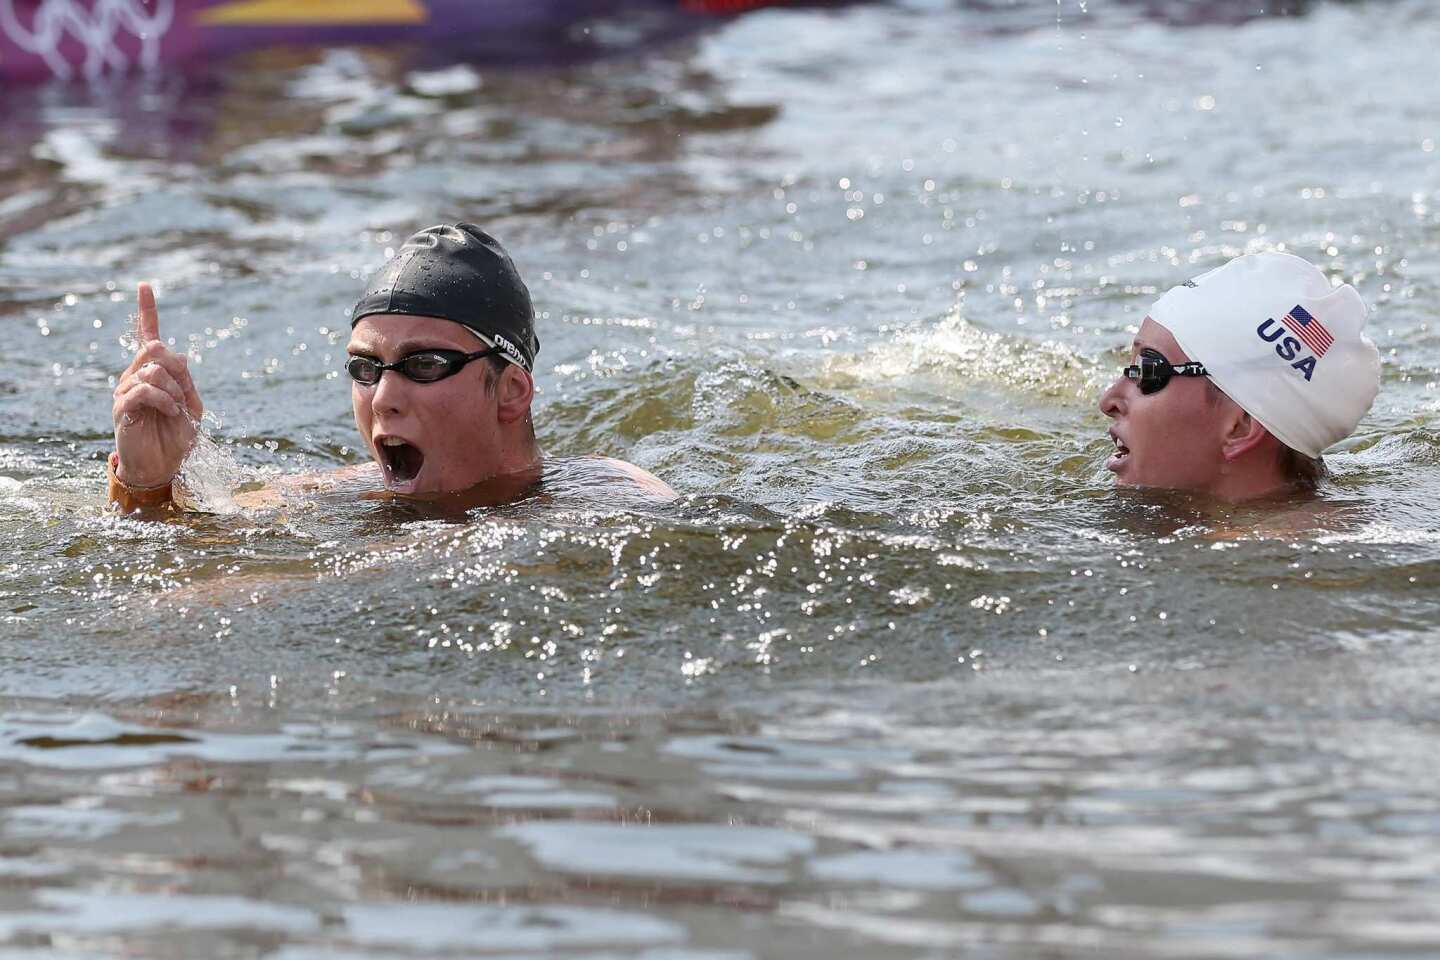 Eva Risztov of Hungary, left, celebrates after winning the gold medal alongside silver medalist Haley Anderson of the United States in the women's open-water swimming marathon.